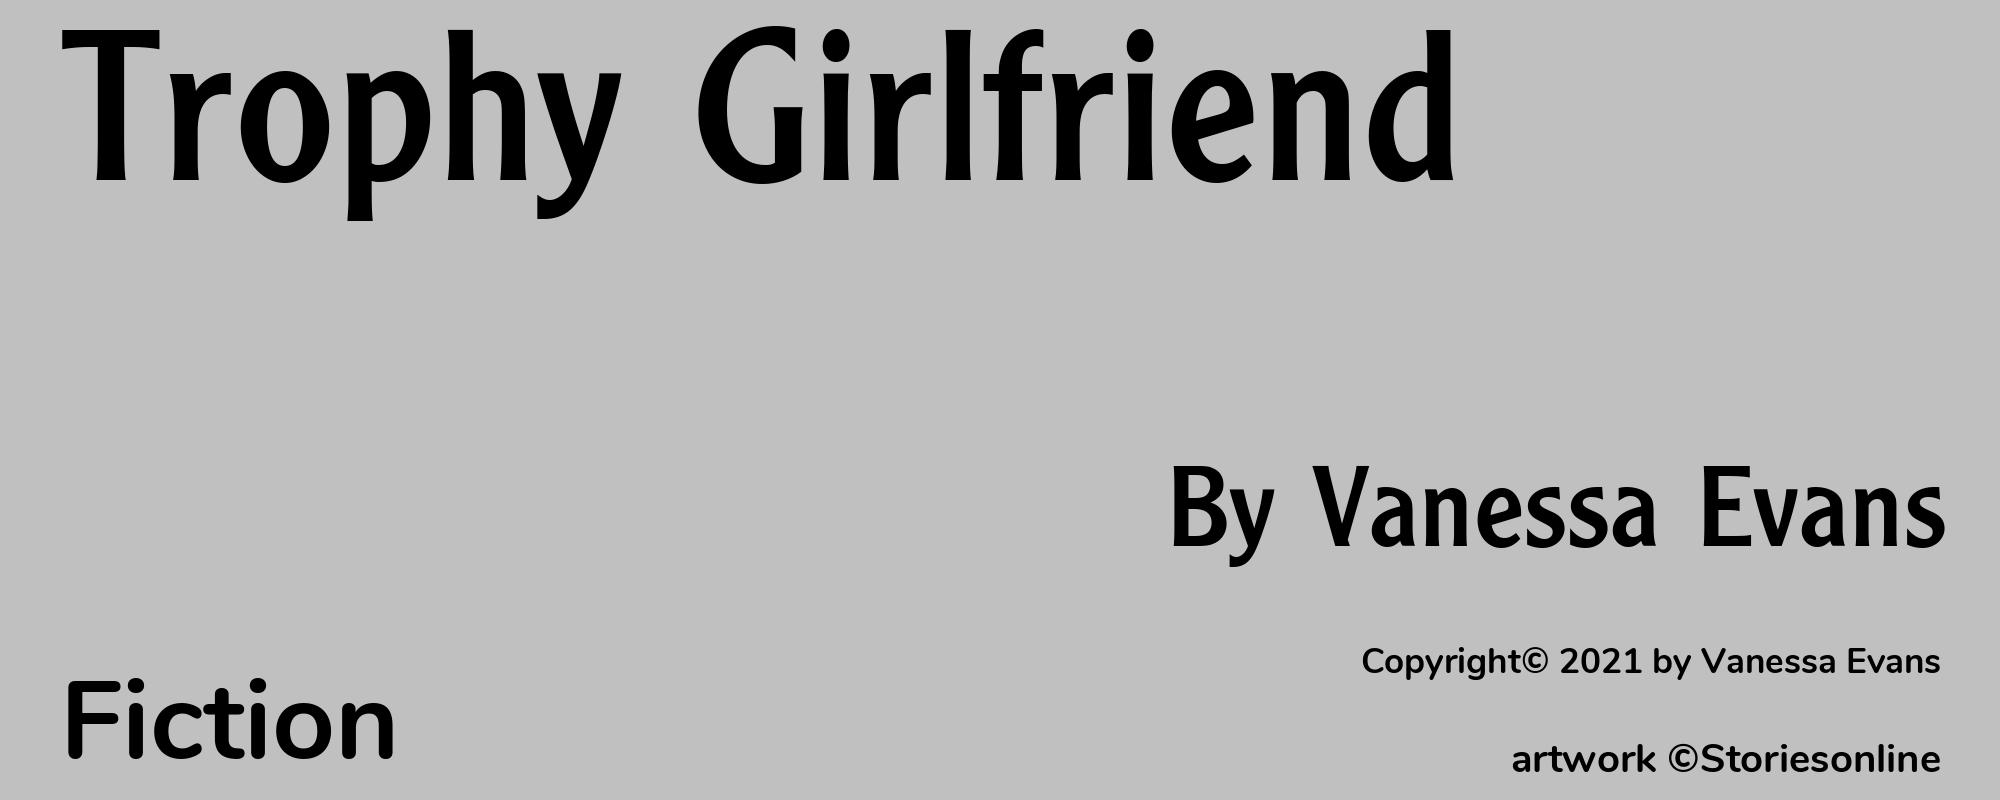 Trophy Girlfriend - Cover